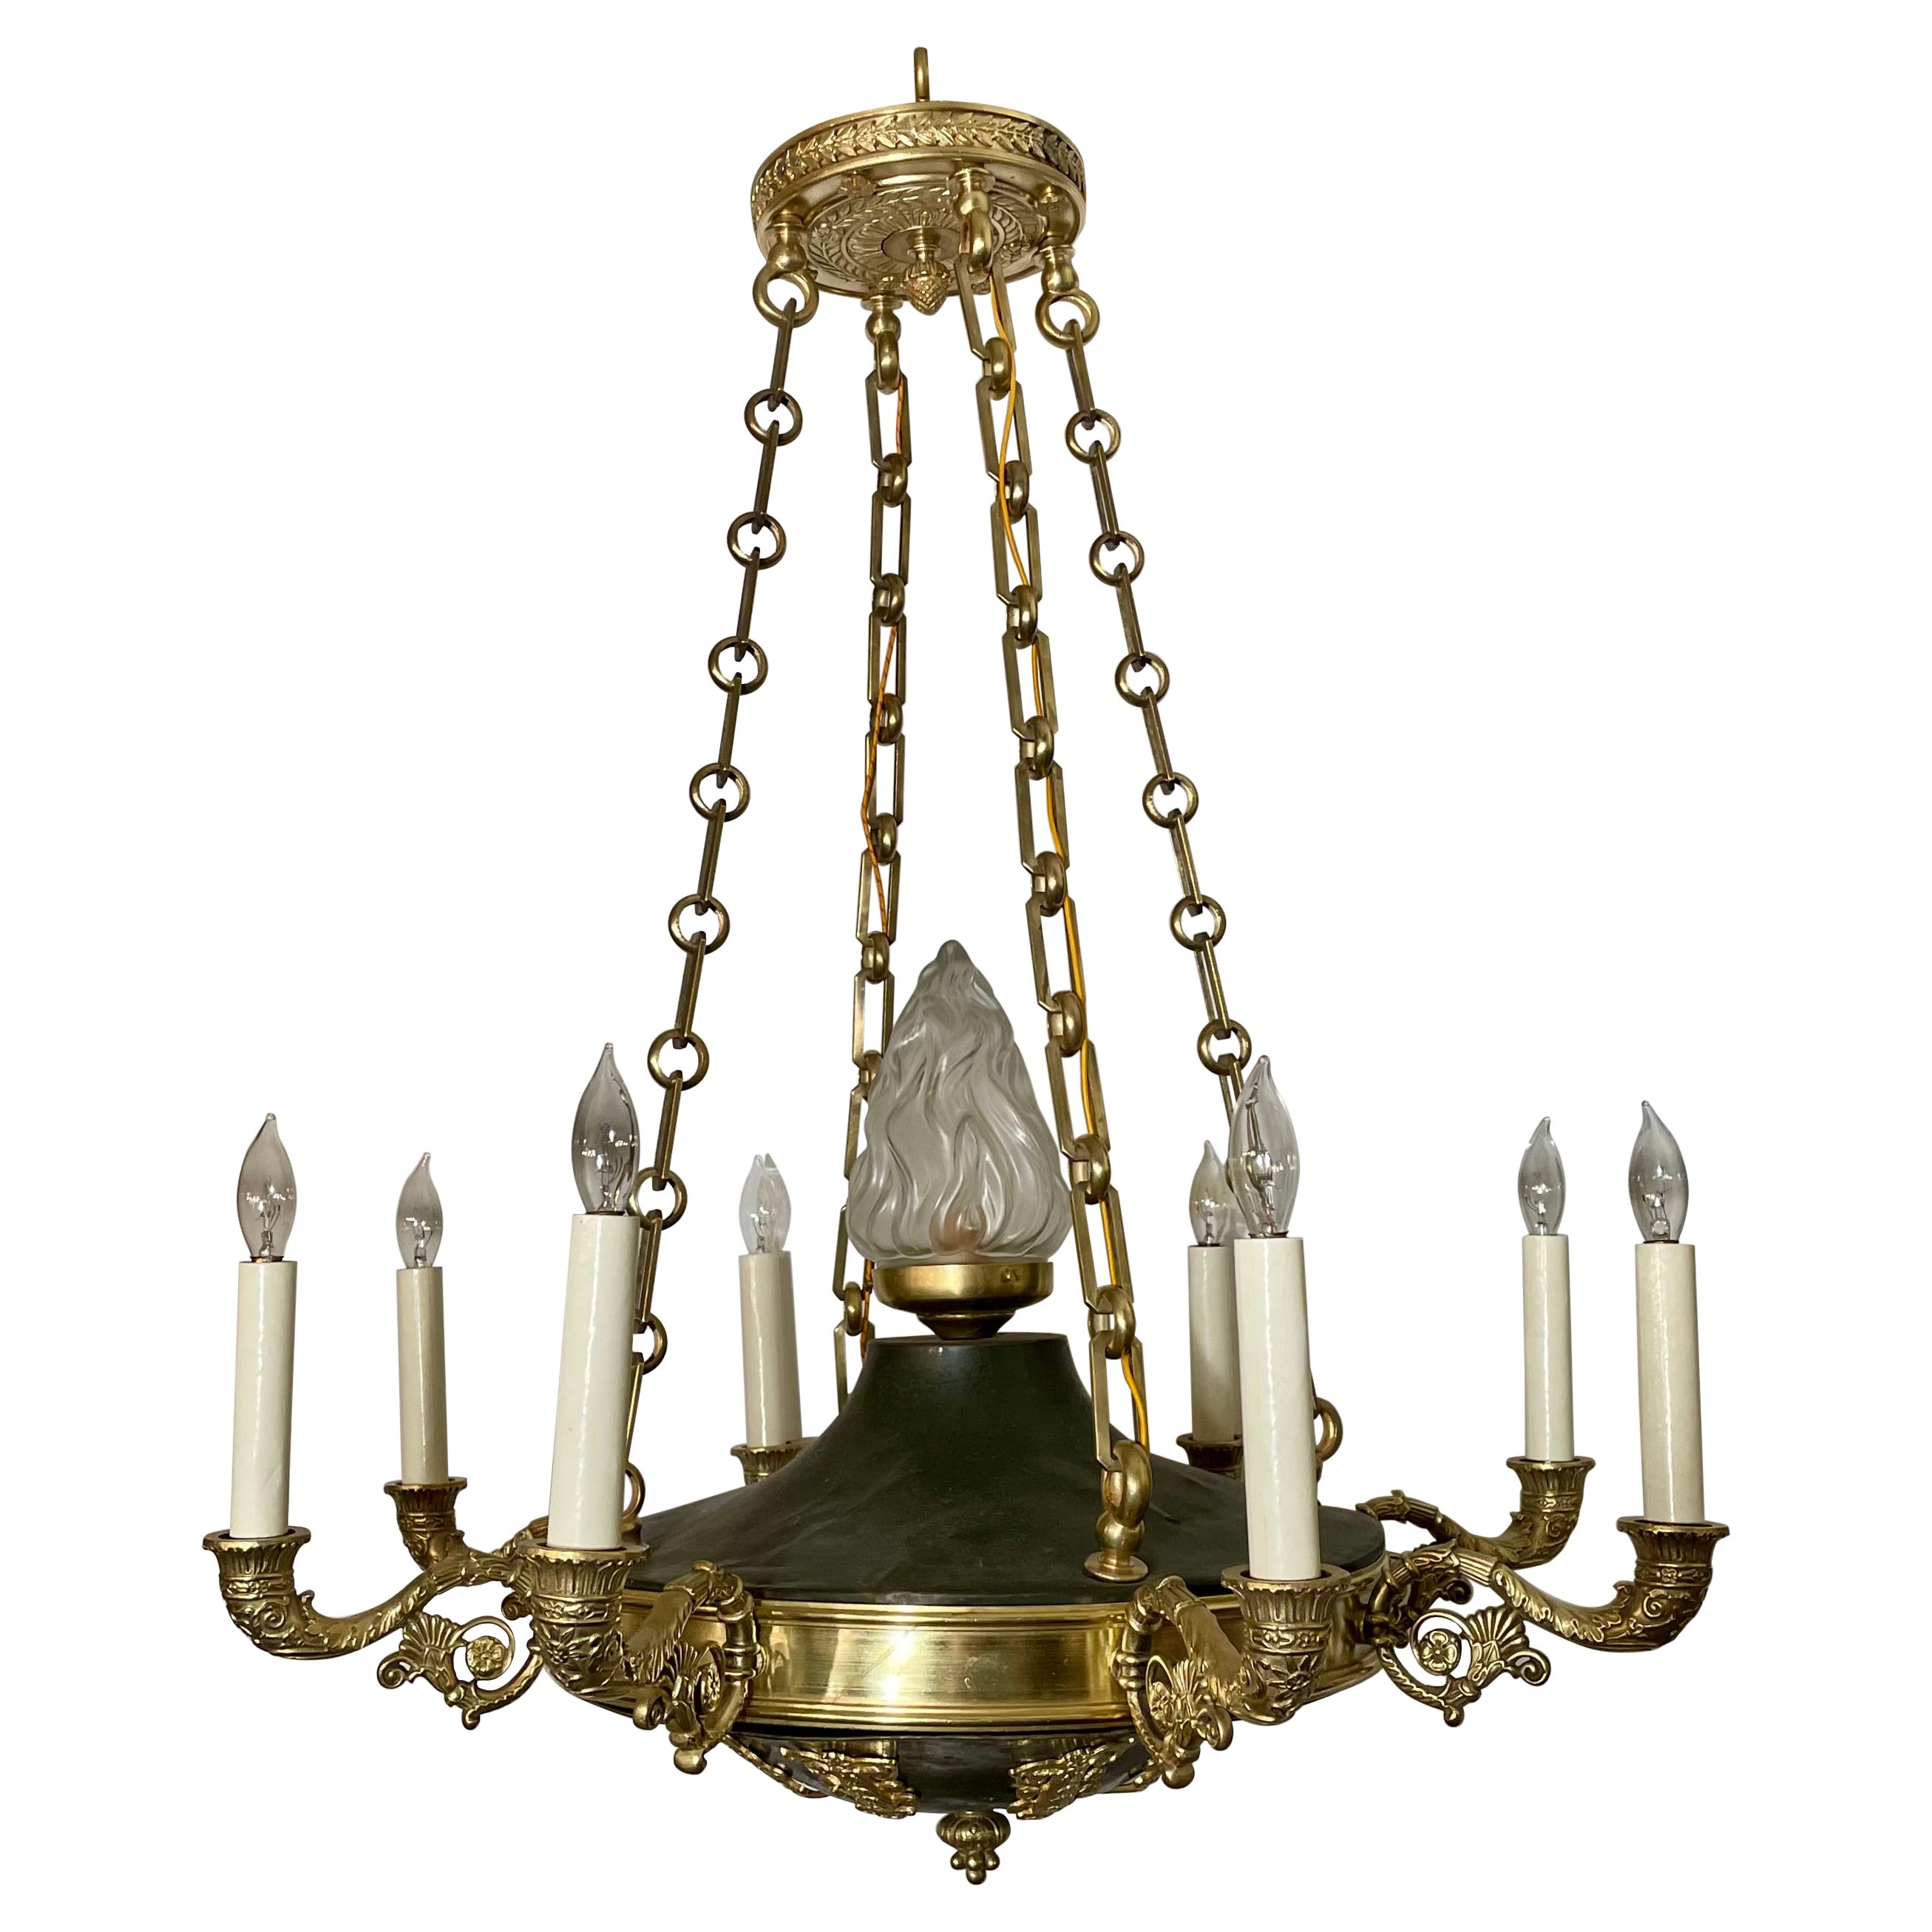 Antique French Empire Chandelier circa 1900 For Sale